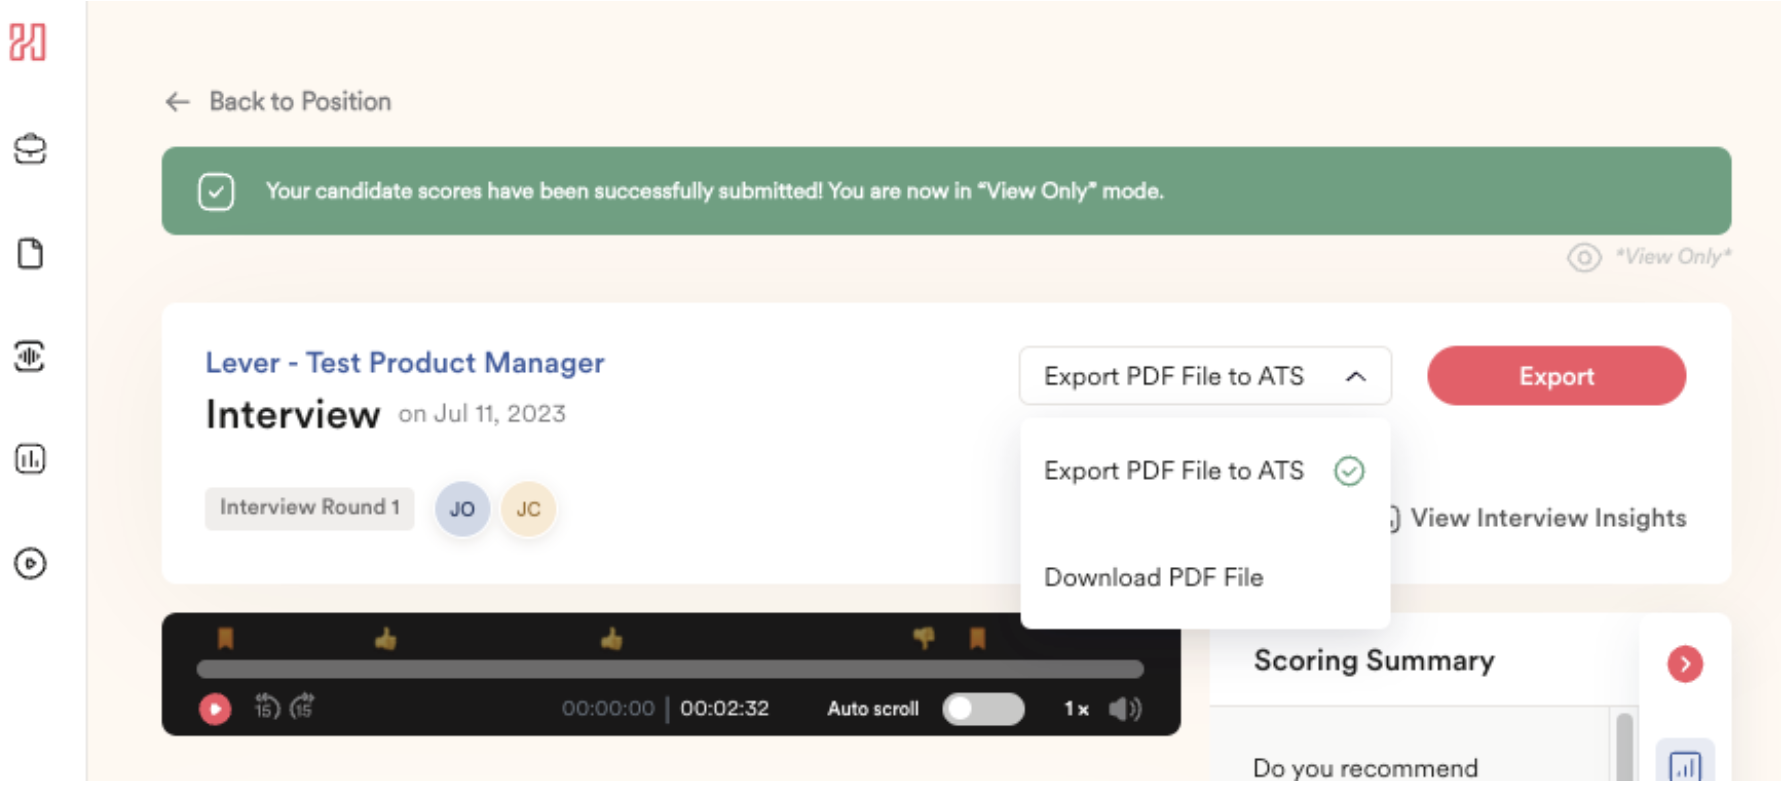 Menu expanded from 'Export PDF File to ATS' field on interview details page